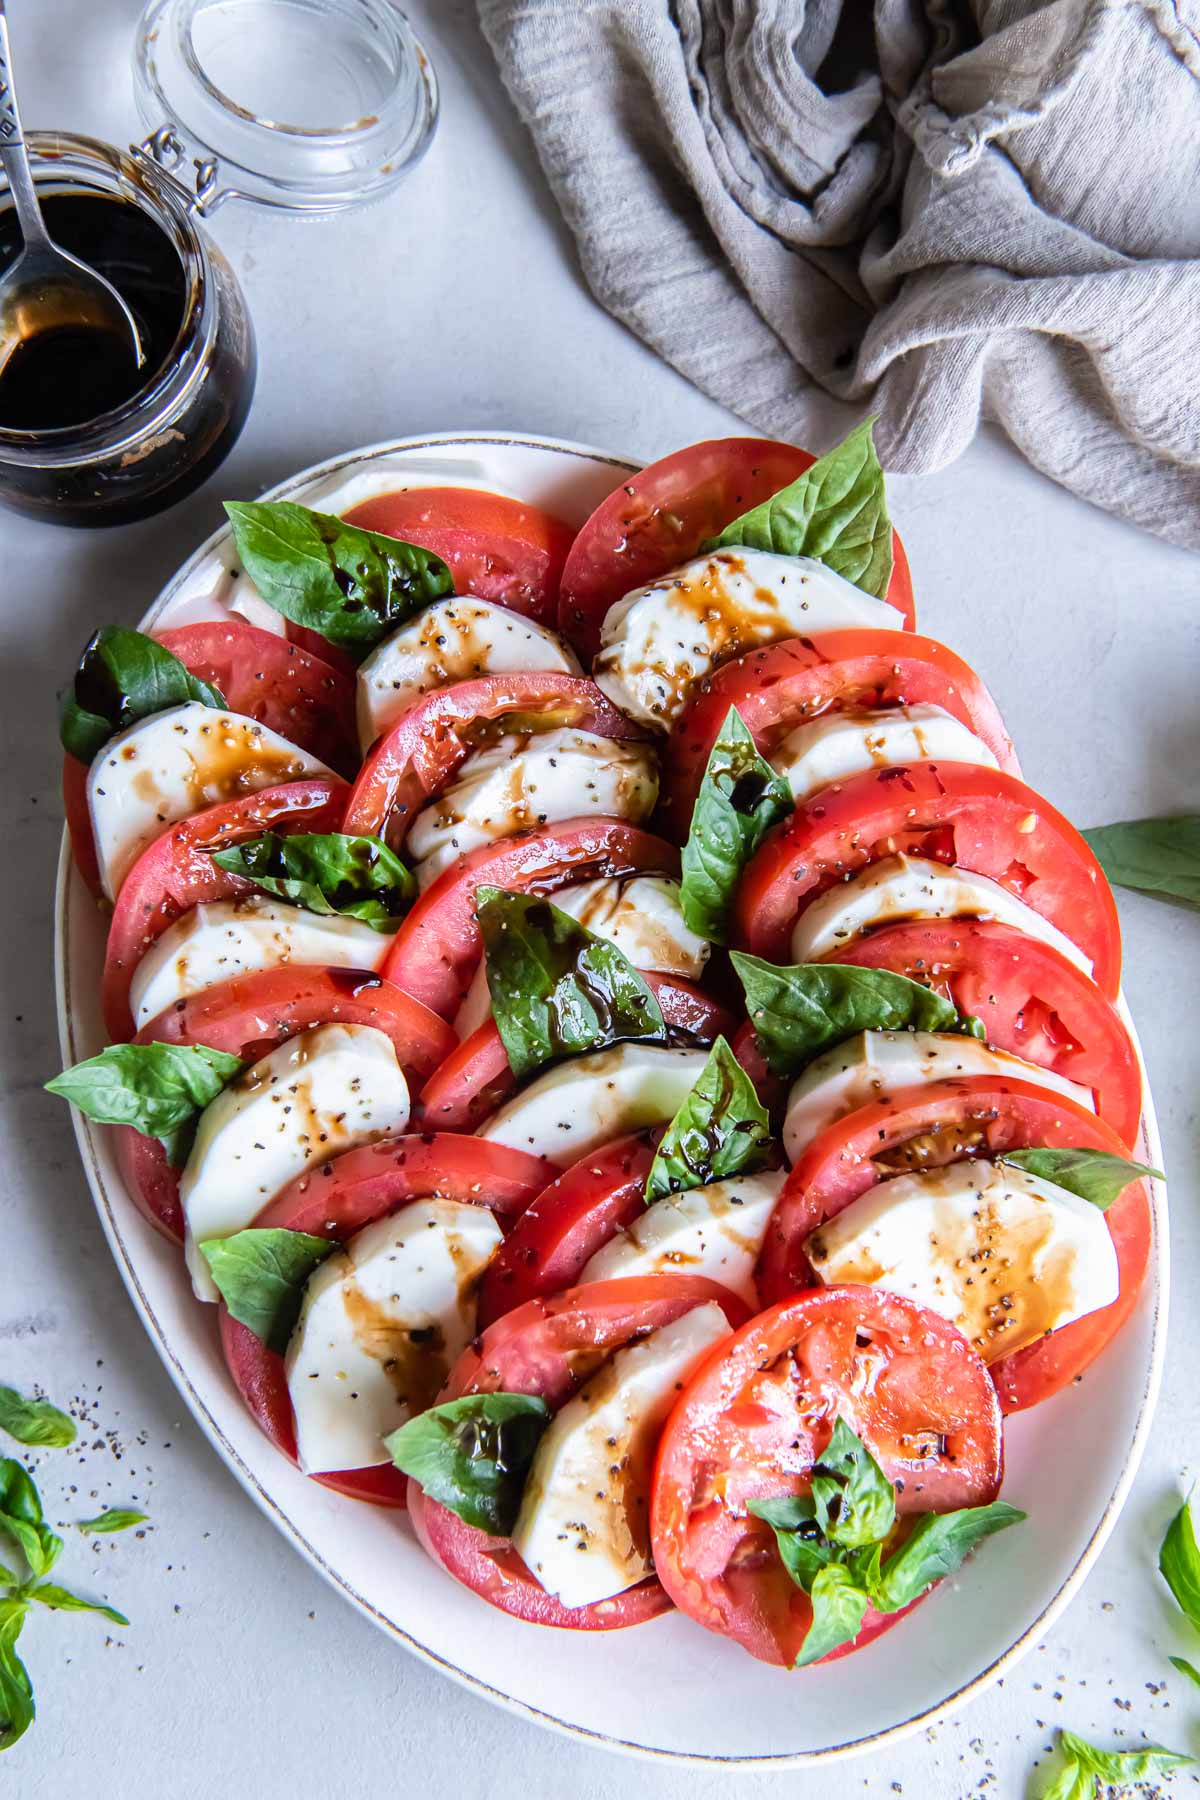 Caprese salad served on an oval plate with balsamic reduction.